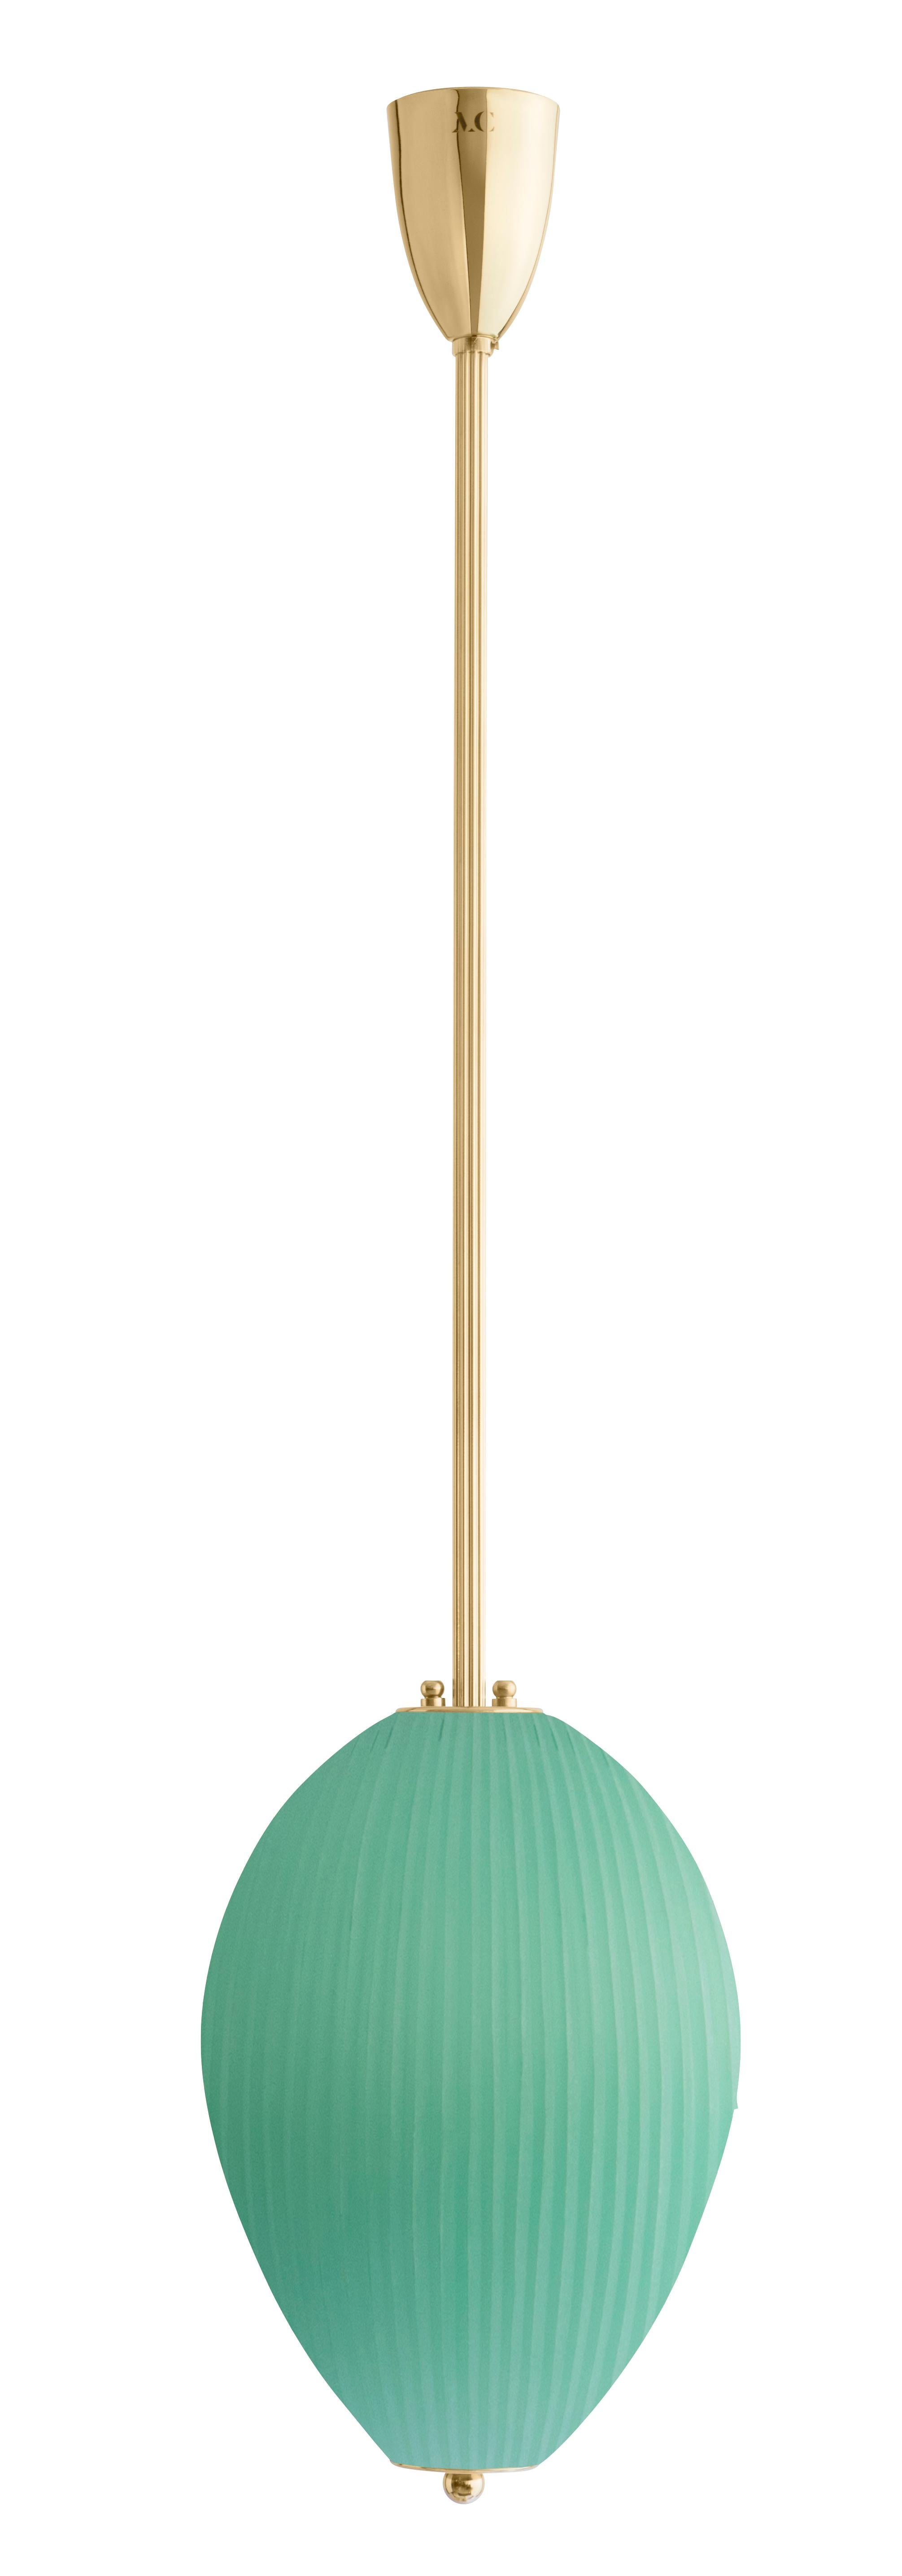 Pendant China 10 by Magic Circus Editions
Dimensions: H 90 x W 25.2 x D 25.2 cm, also available in H 110, 130, 150, 175, 190 cm
Materials: Brass, mouth blown glass sculpted with a diamond saw
Colour: jade green

Available finishes: Brass,